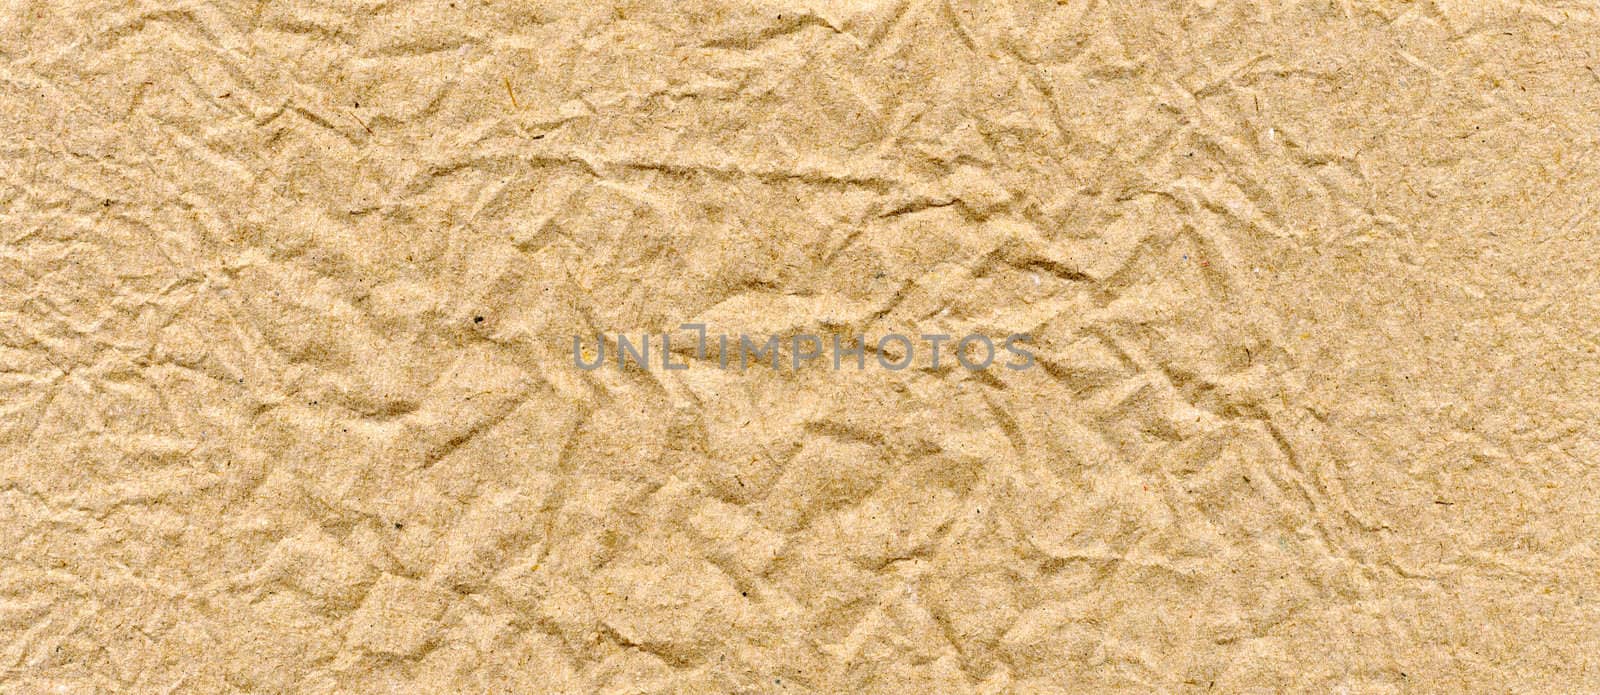 texture of brown paper, pressed, crushed, background
